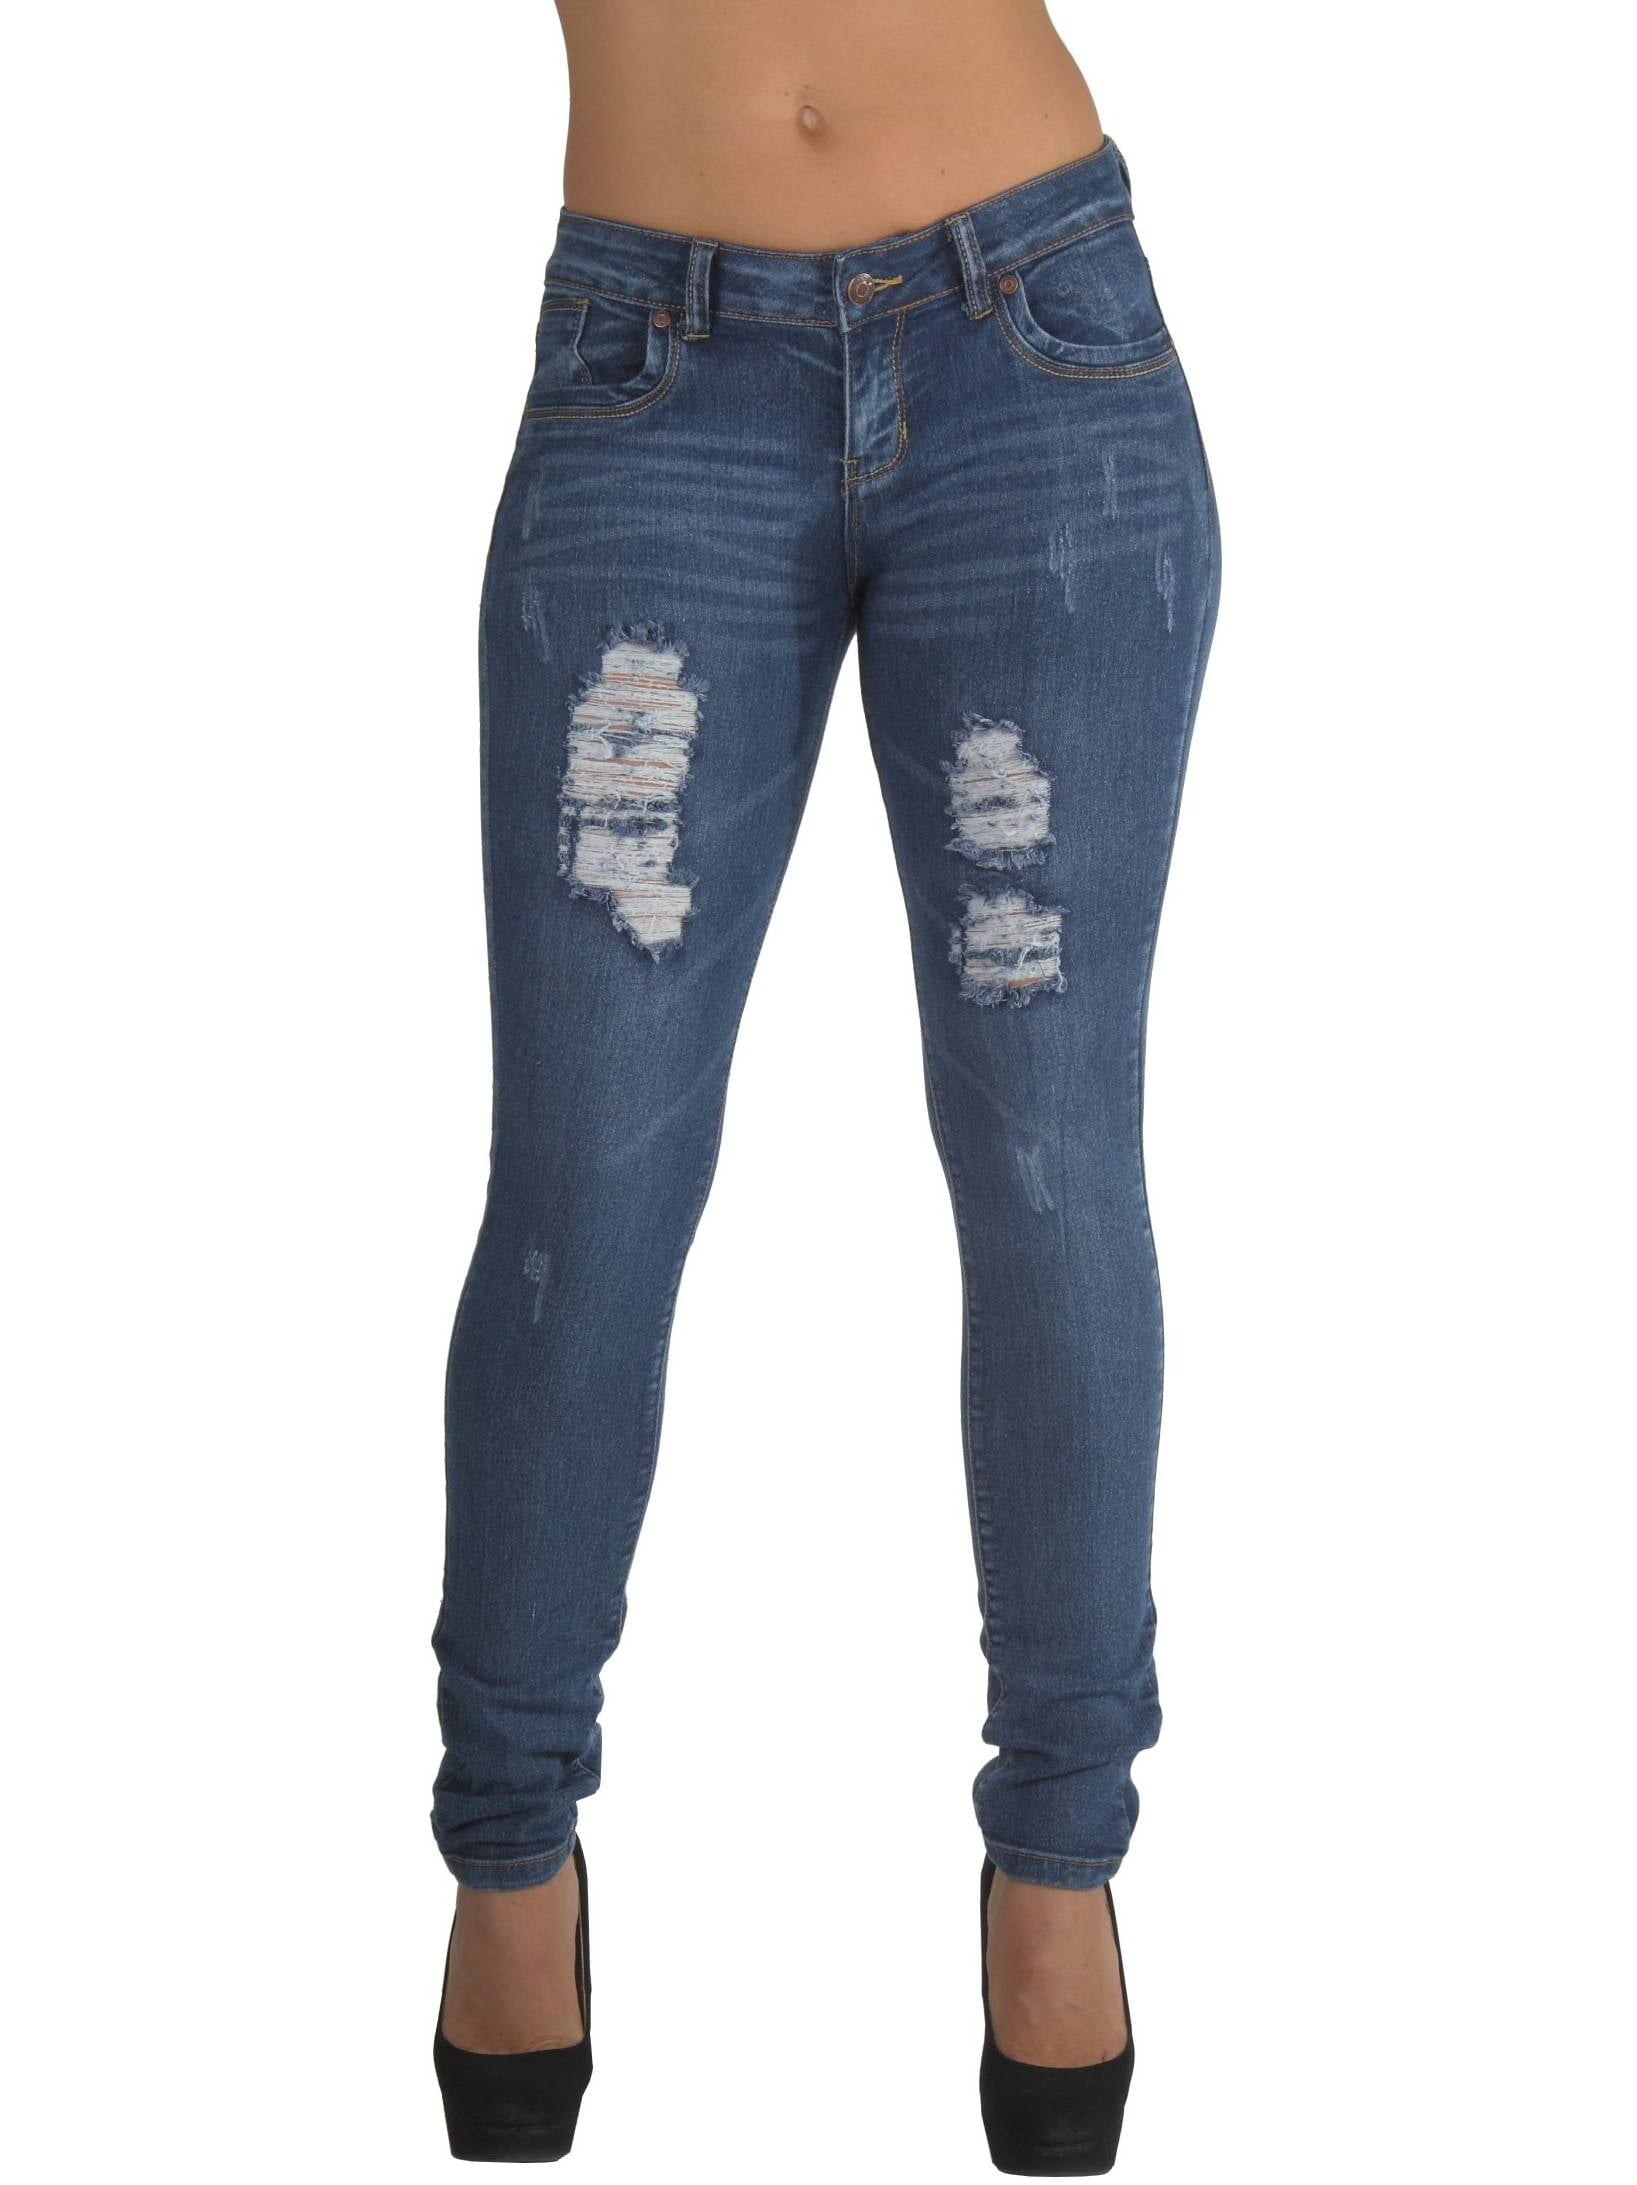 Fashion2Love Plus Size Classic Ripped Distressed Destroyed Skinny Jeans ...